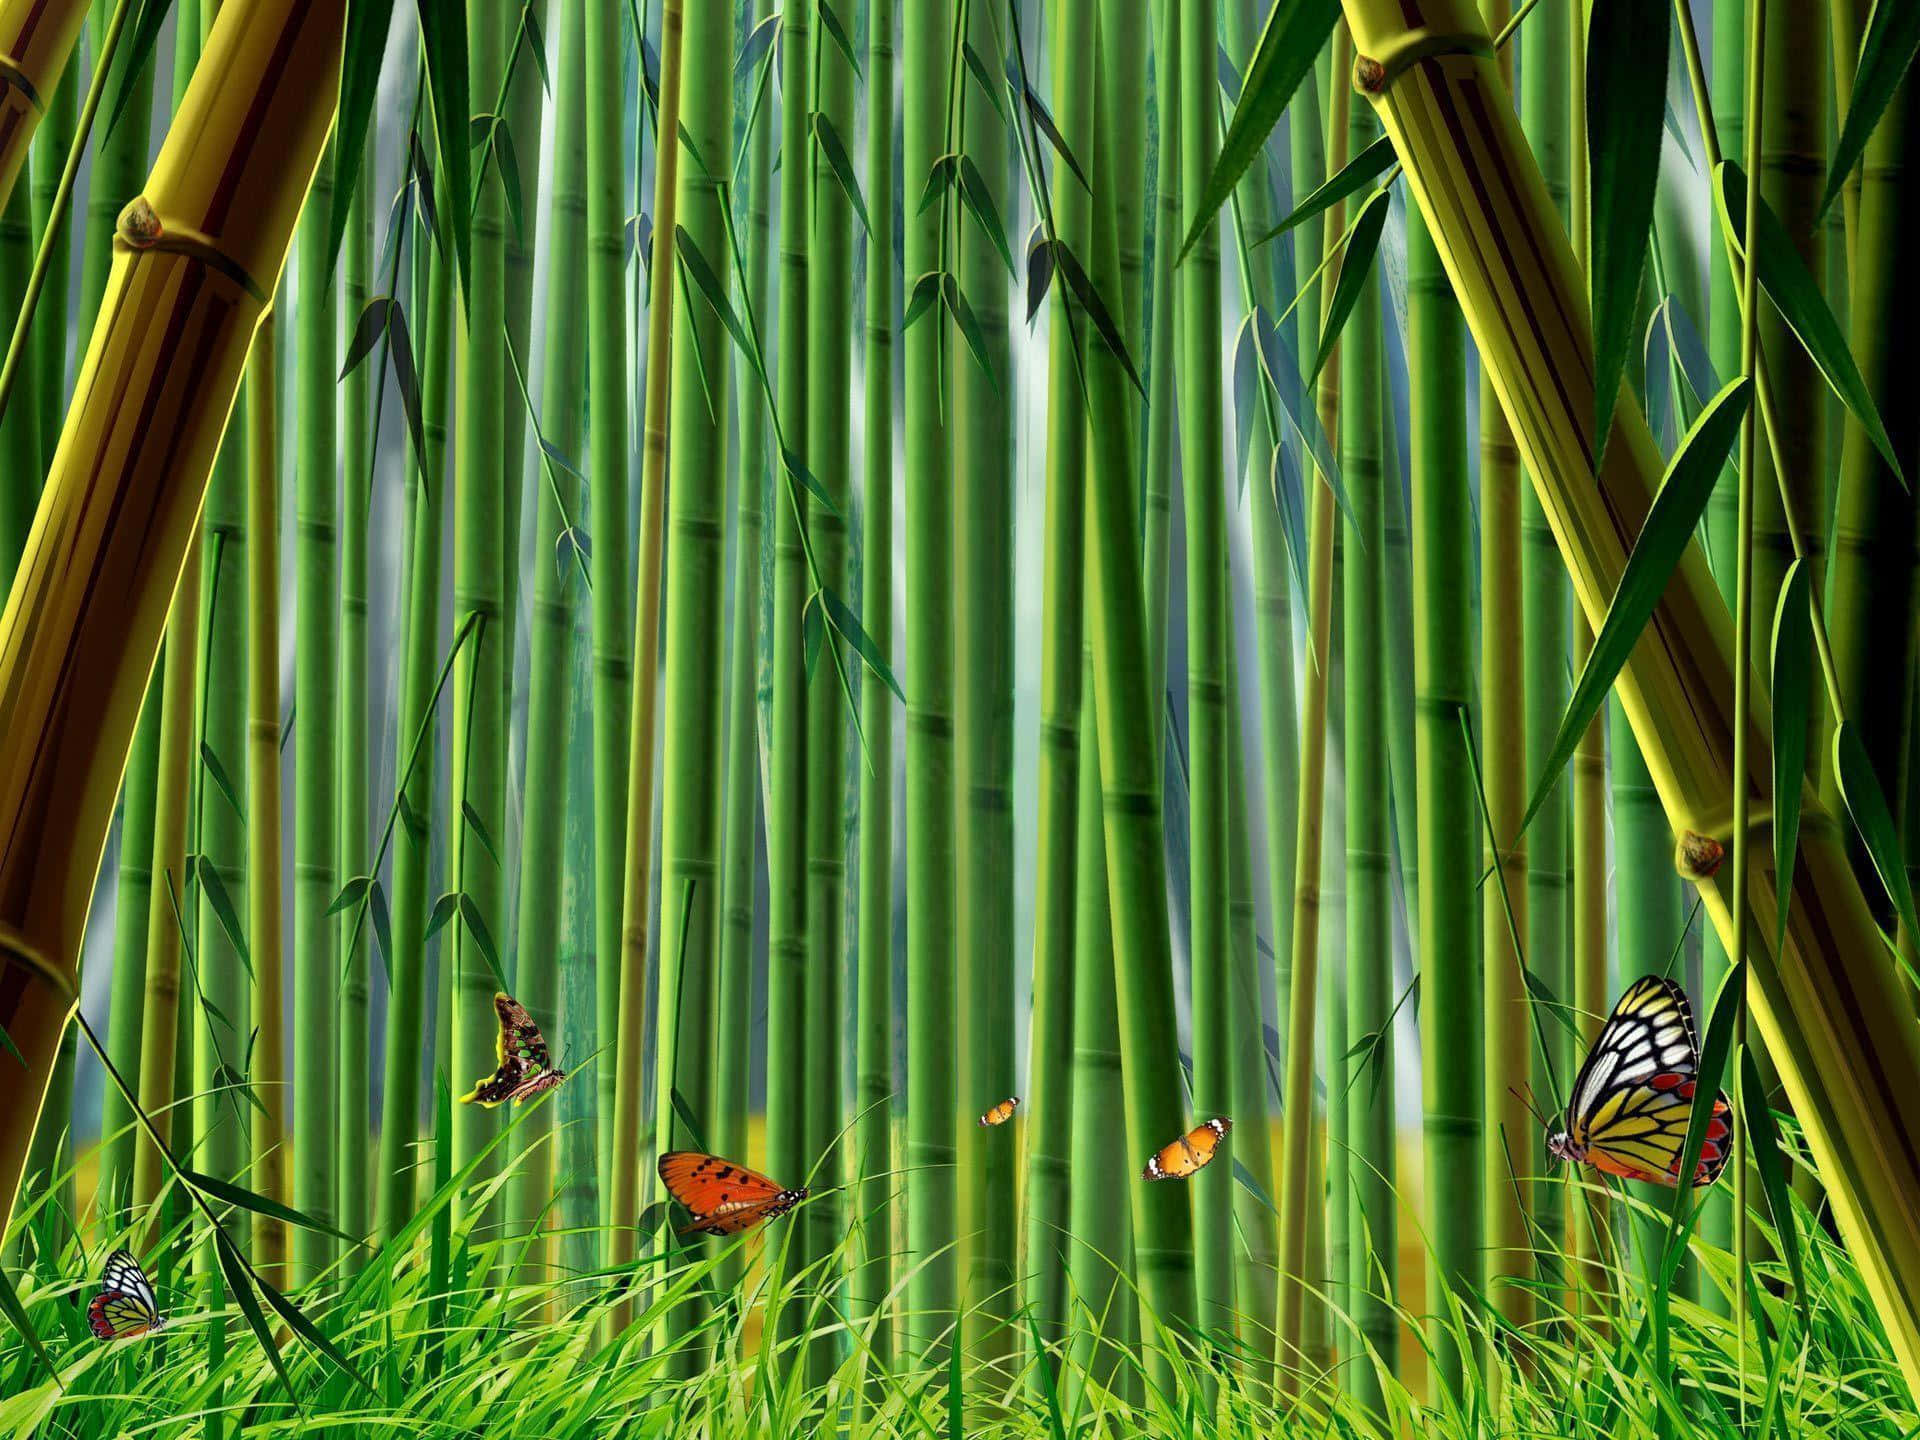 Lush and Green Bamboo on a Desktop Wallpaper